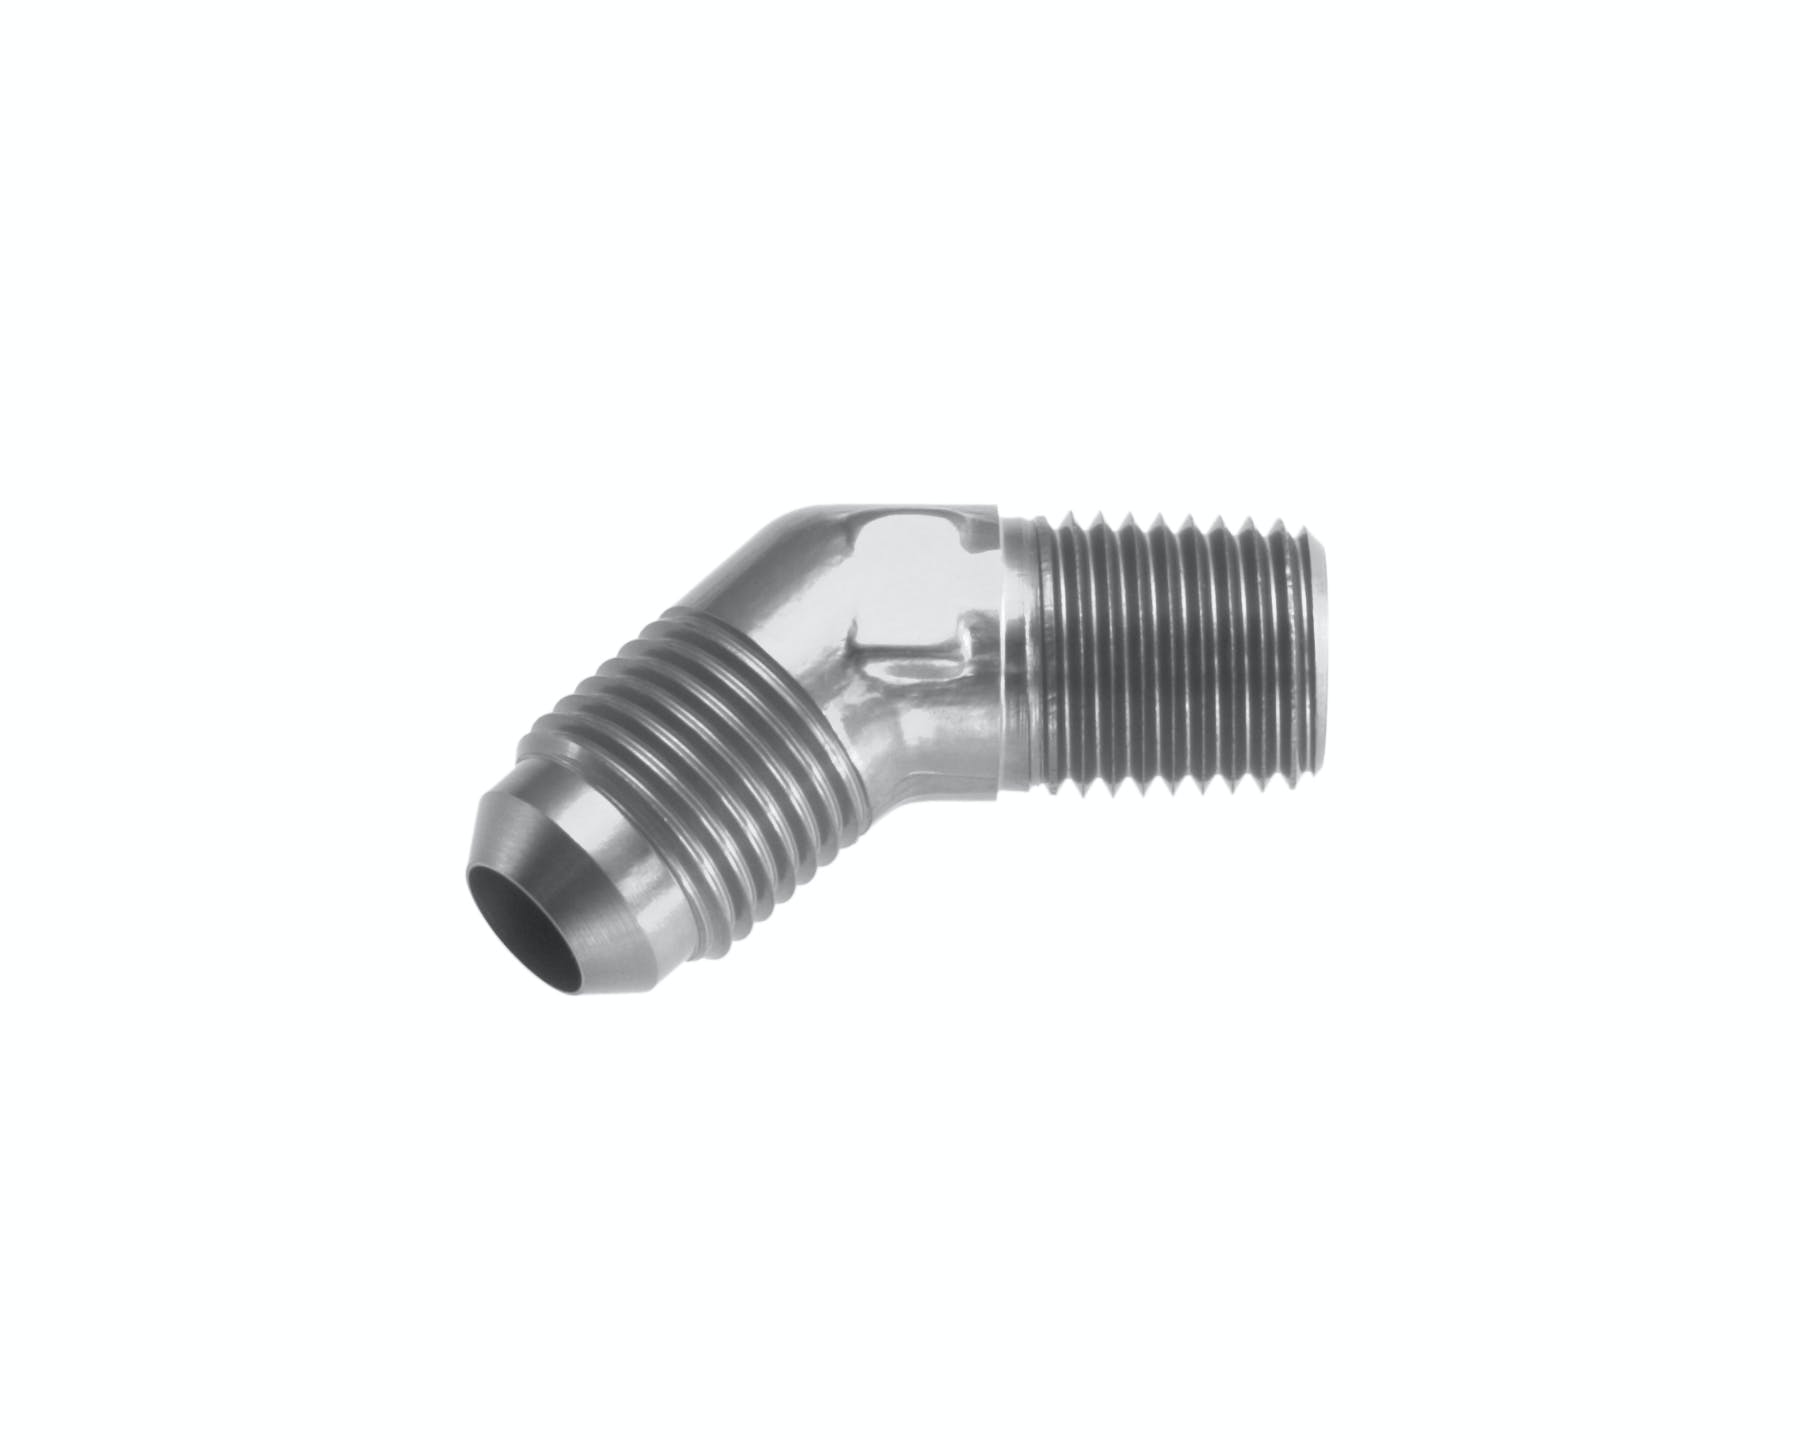 Redhorse Performance 823-16-12-5 -16 45 degree Male adapter to -12 (3/4in) NPT Male - clear